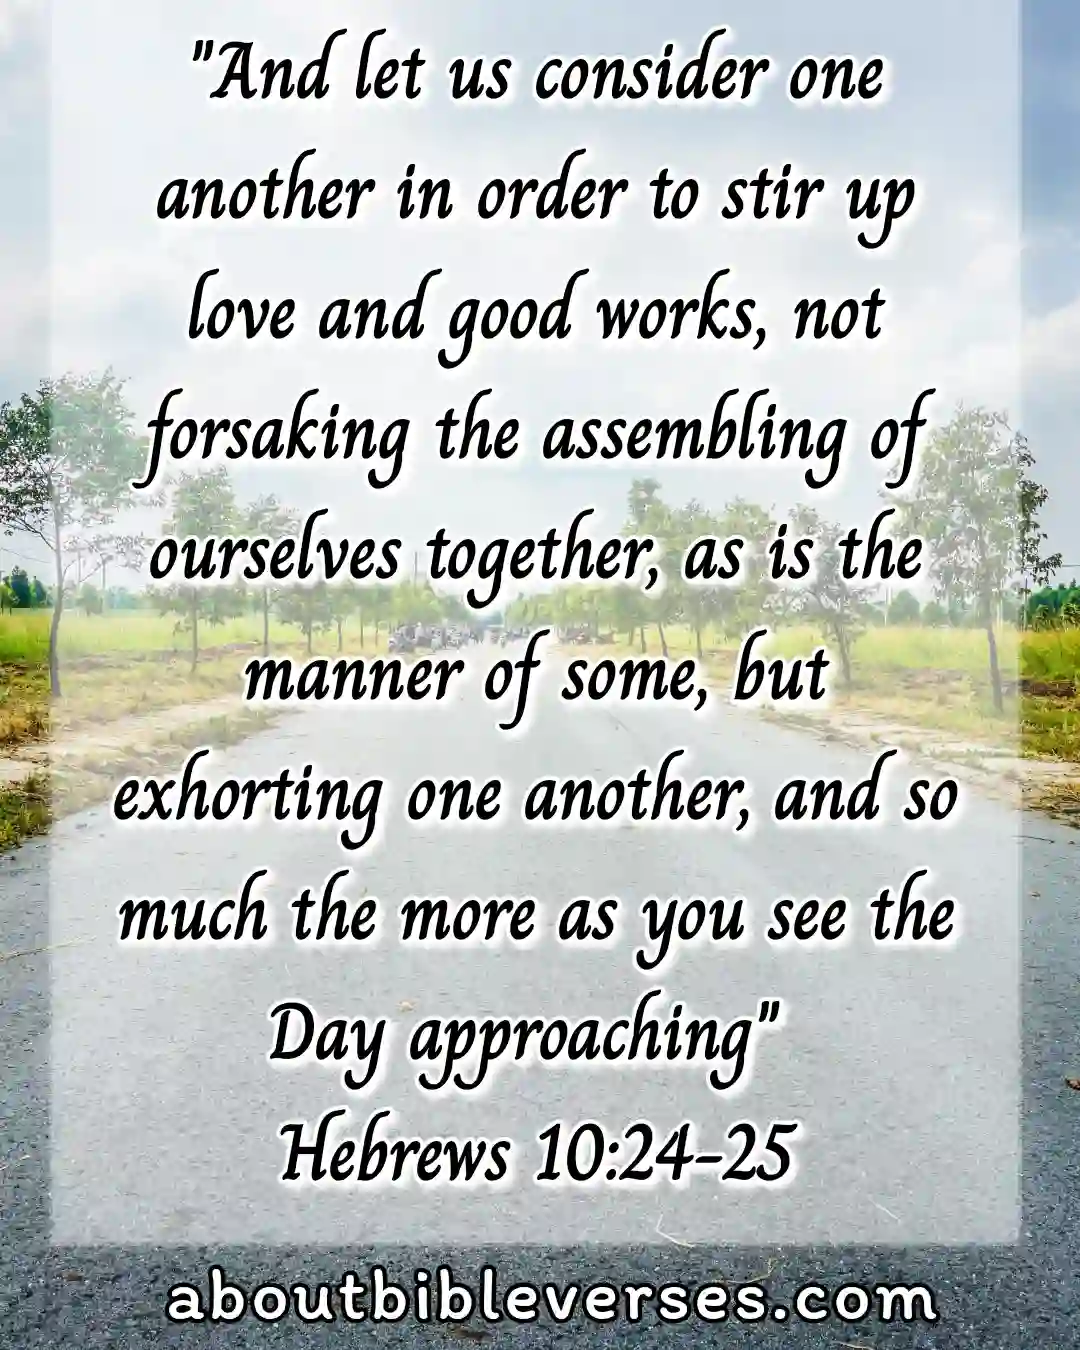 bible verses about encouraging others (Hebrews 10:24-25)